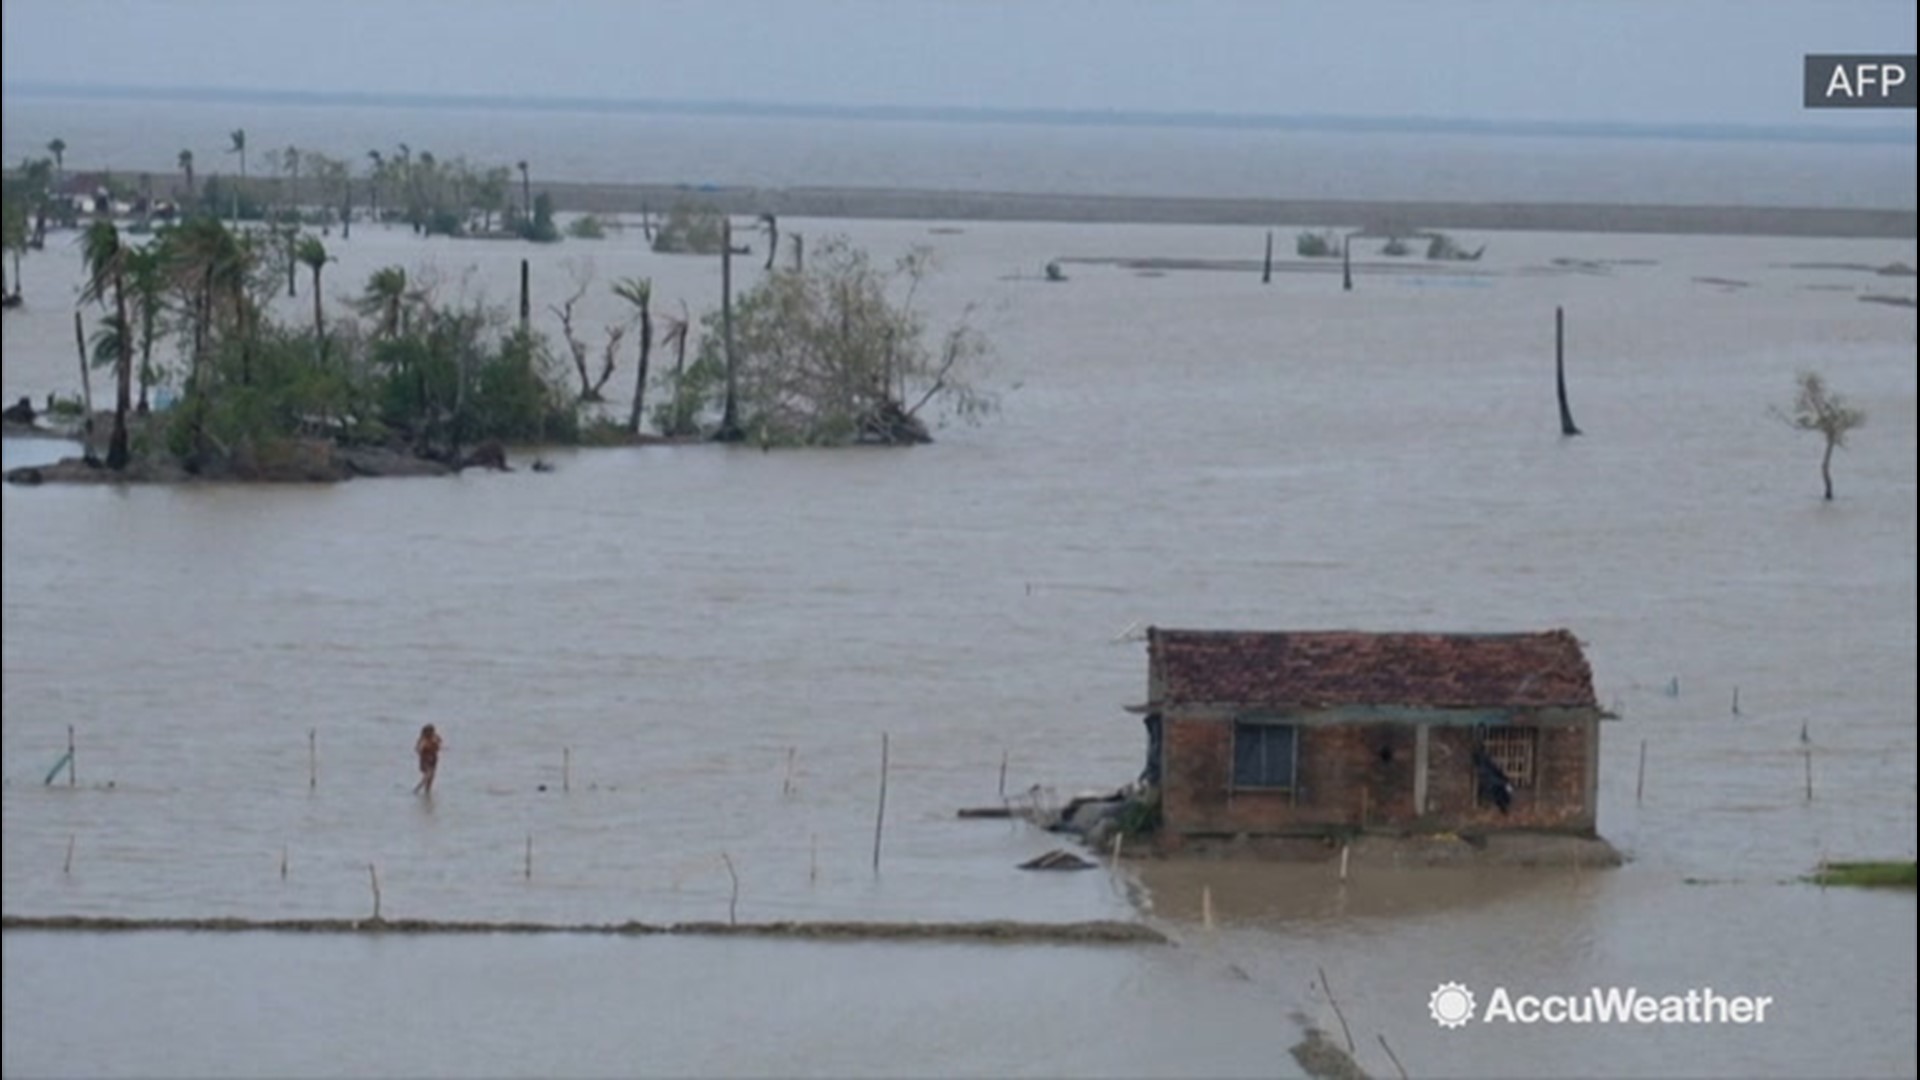 Homes on Mousuni Island, an island of India, were surrounded by floodwaters on Nov. 8, after Cyclone Bulbul barreled through the region, packing powerful winds and torrential rain.